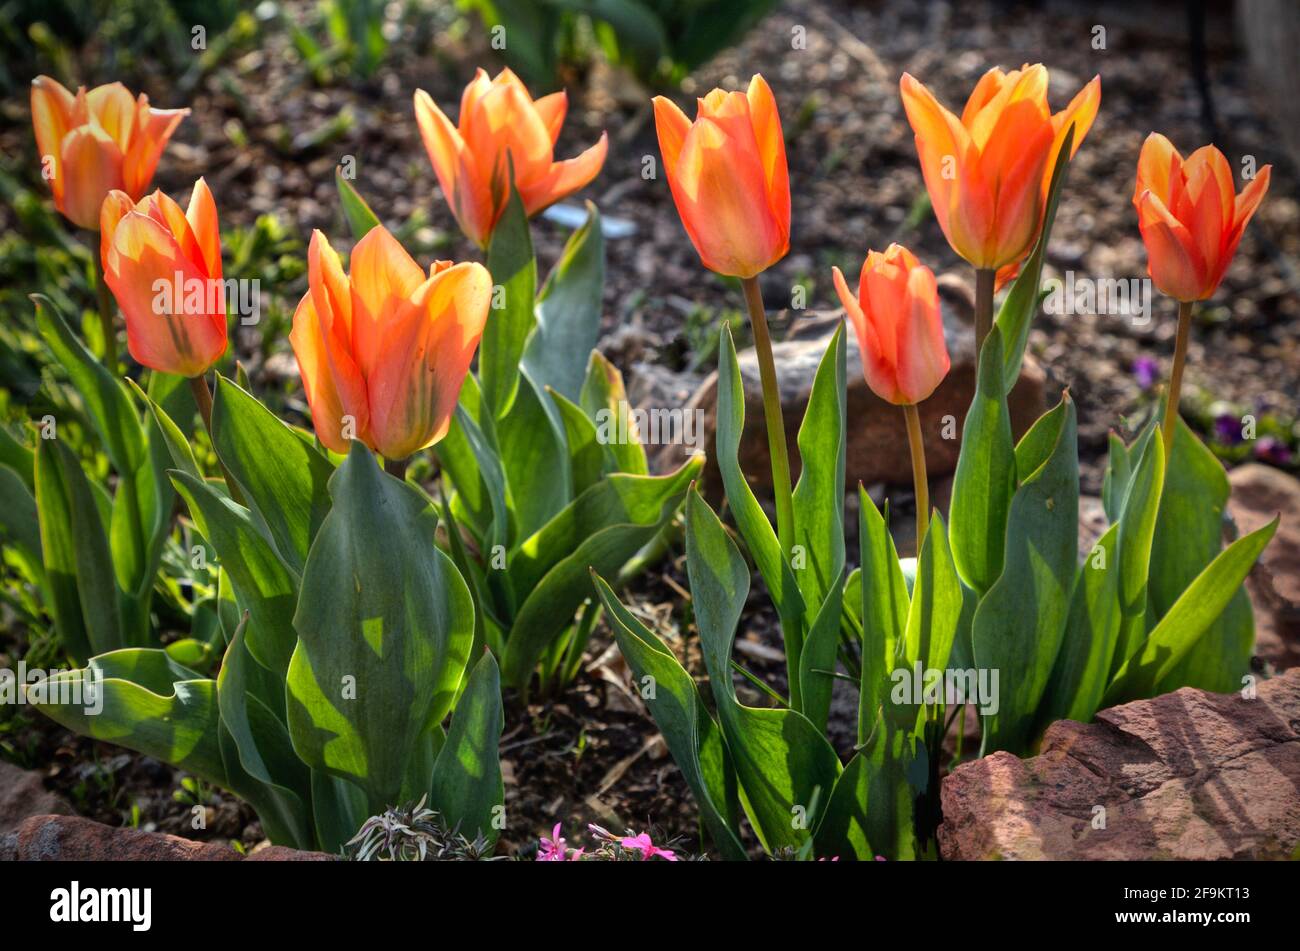 A row of tulips with partially open blossoms on a warm spring day. Stock Photo